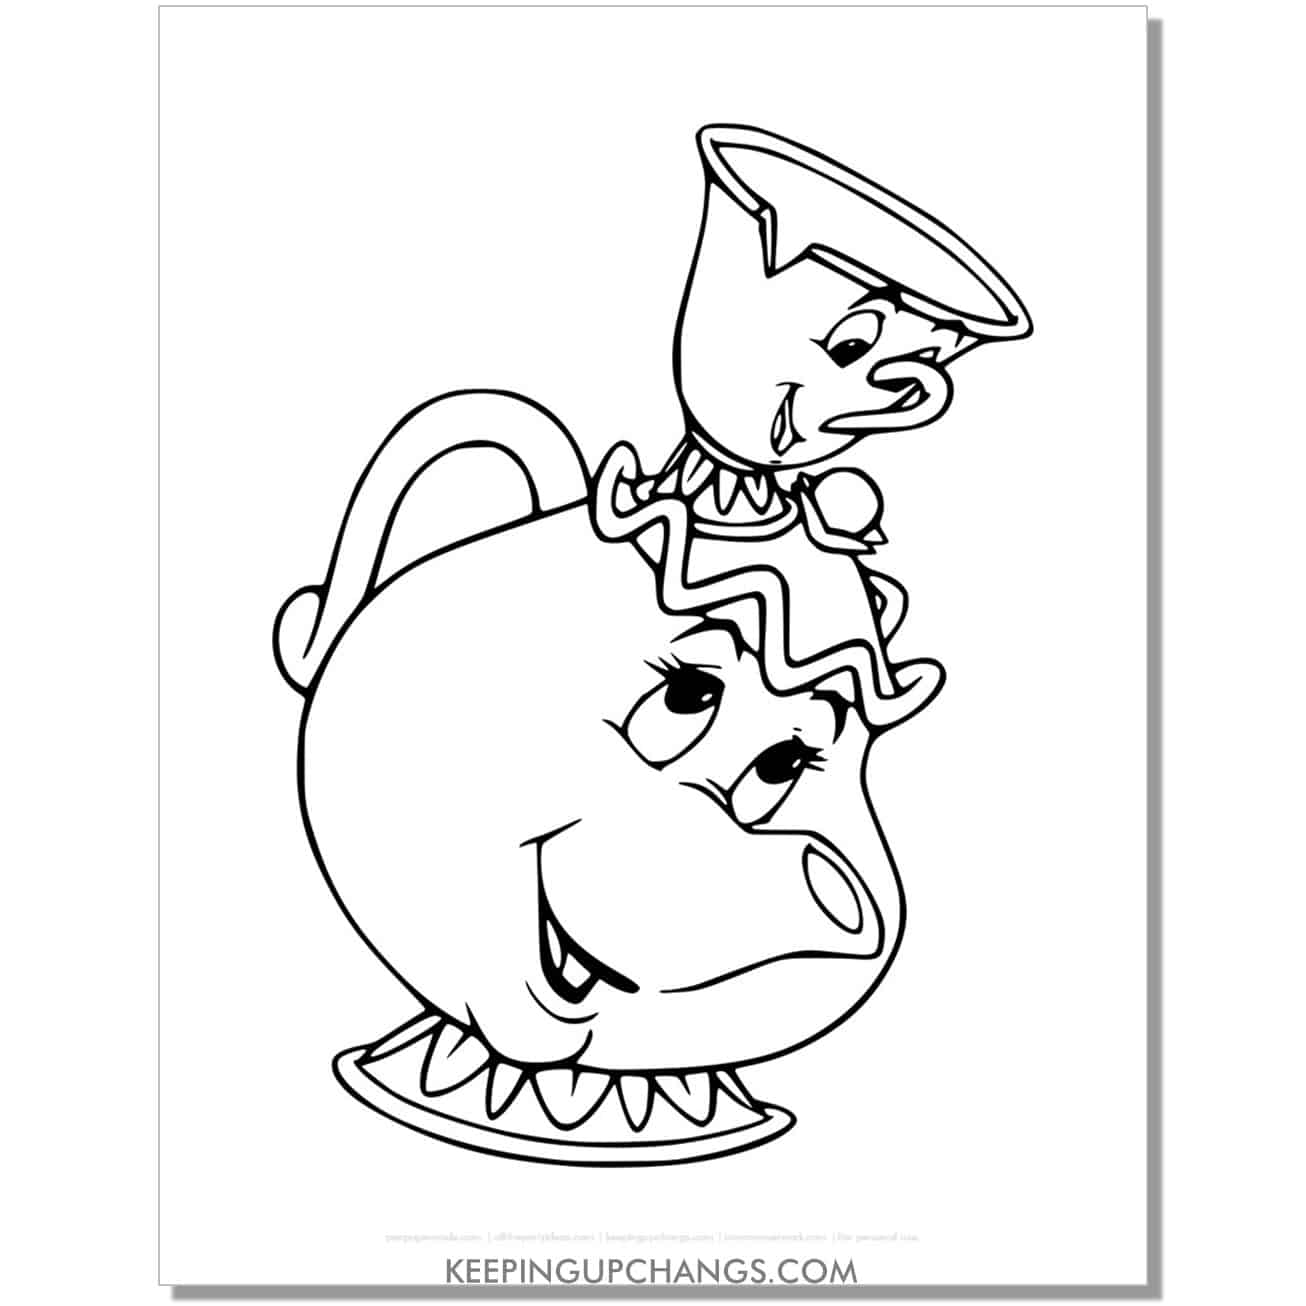 beauty and beast chip on mrs potts' head coloring page, sheet.